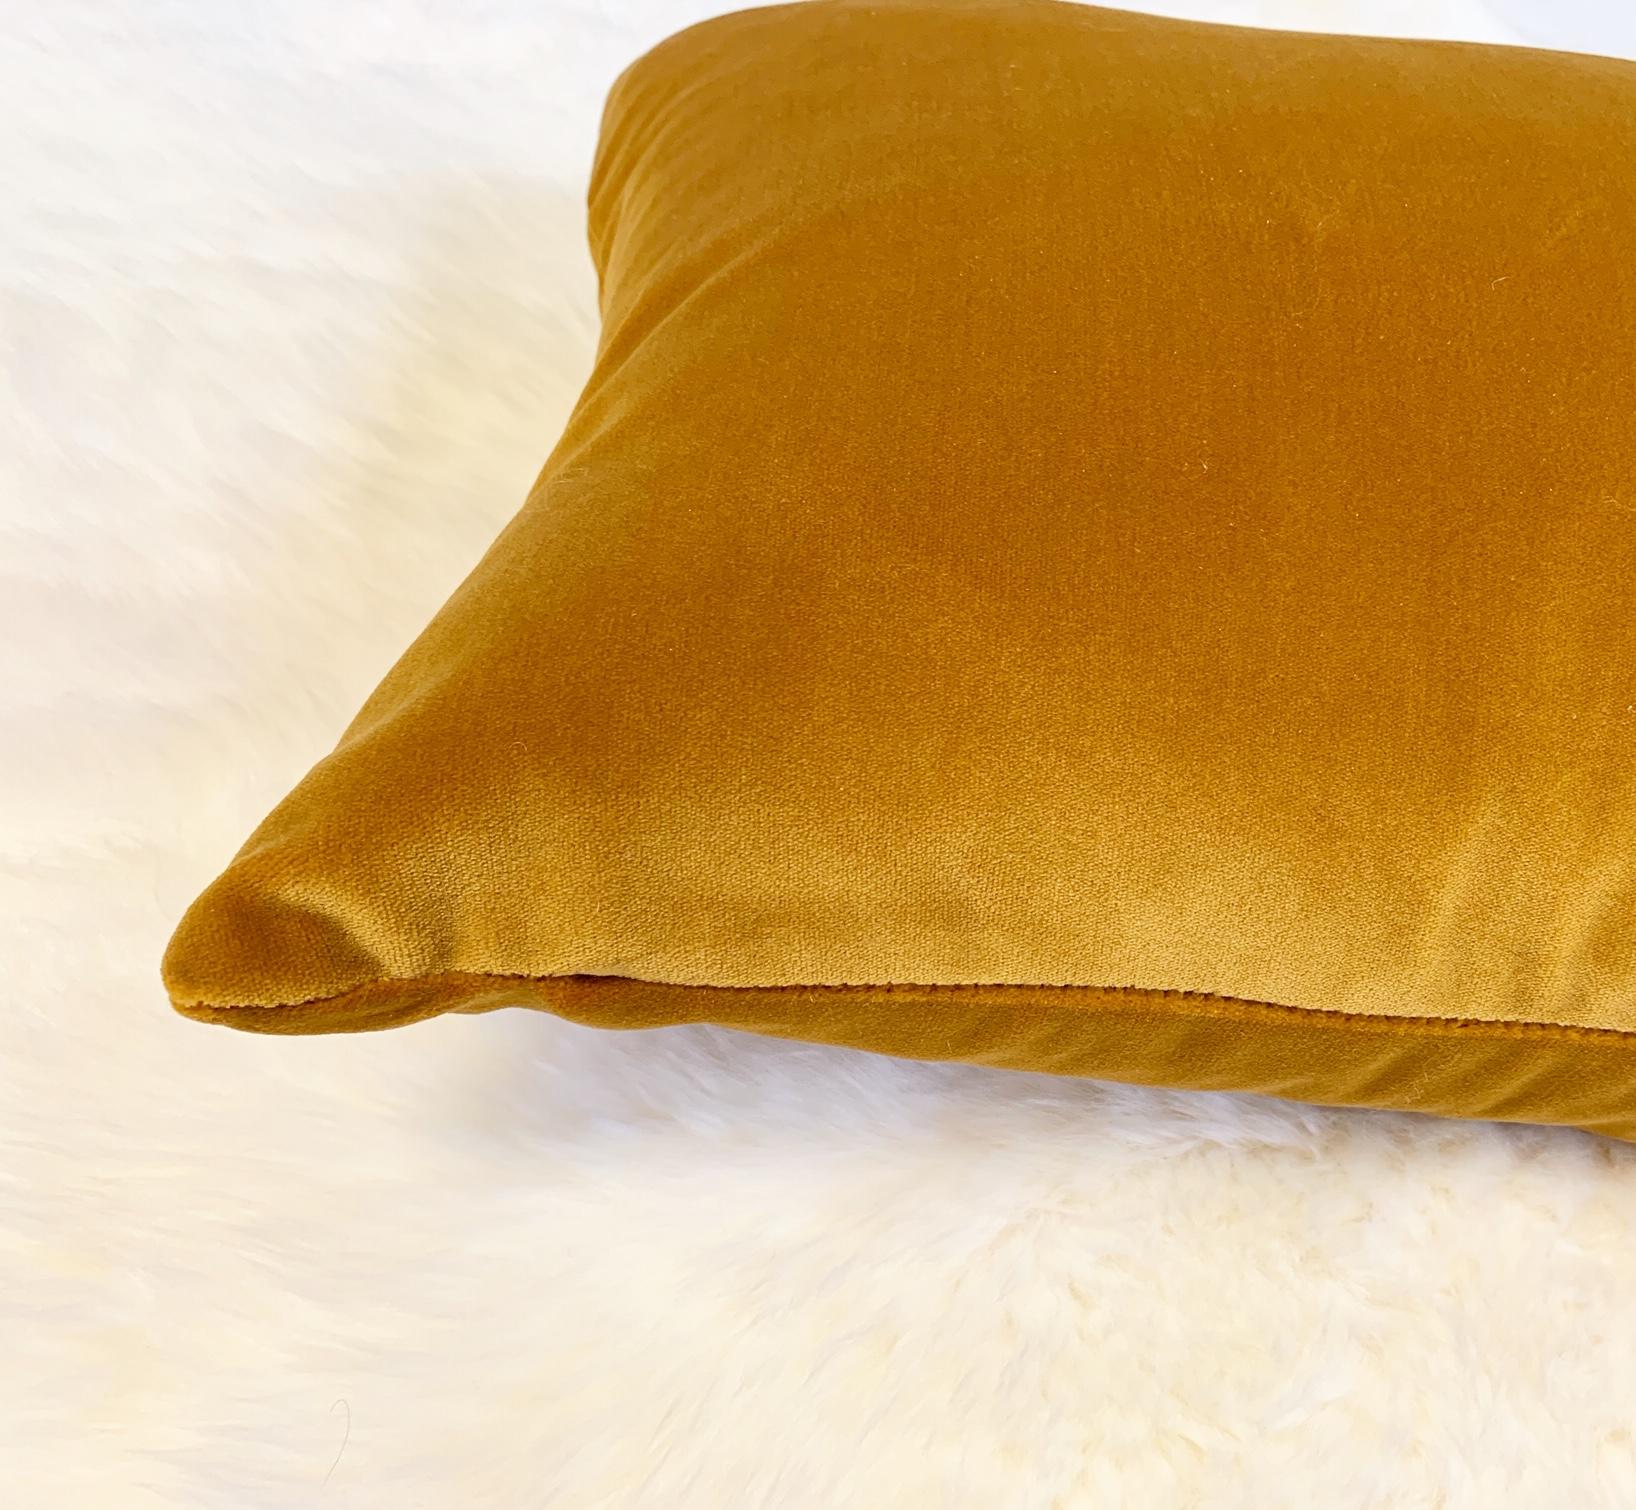 Beautiful pillow crafted in our Saint Louis studio. Loro Piana's cotton velvet is so luxurious. The Ginger Alchemy colorway is a mustard gold hue. We adore it! Down feather insert included.